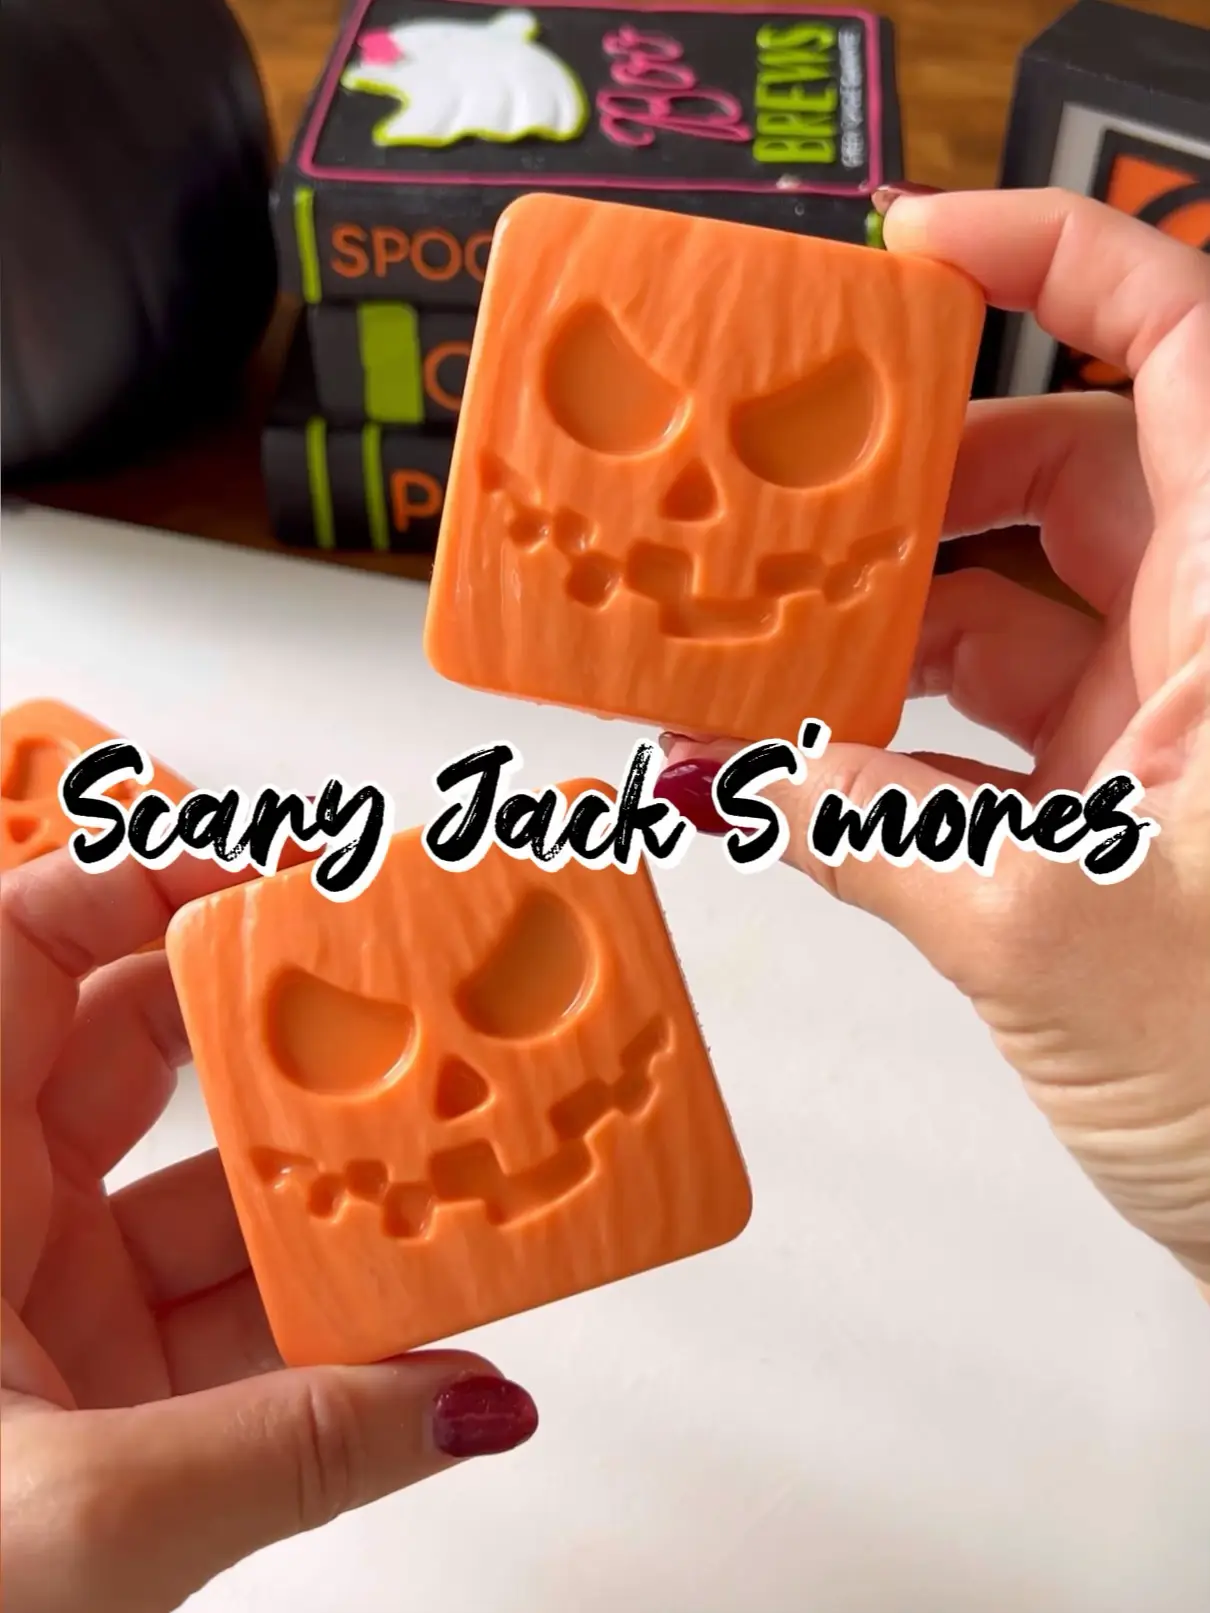 Scary Jack S'mores 🎃, Video published by Taryn Camp